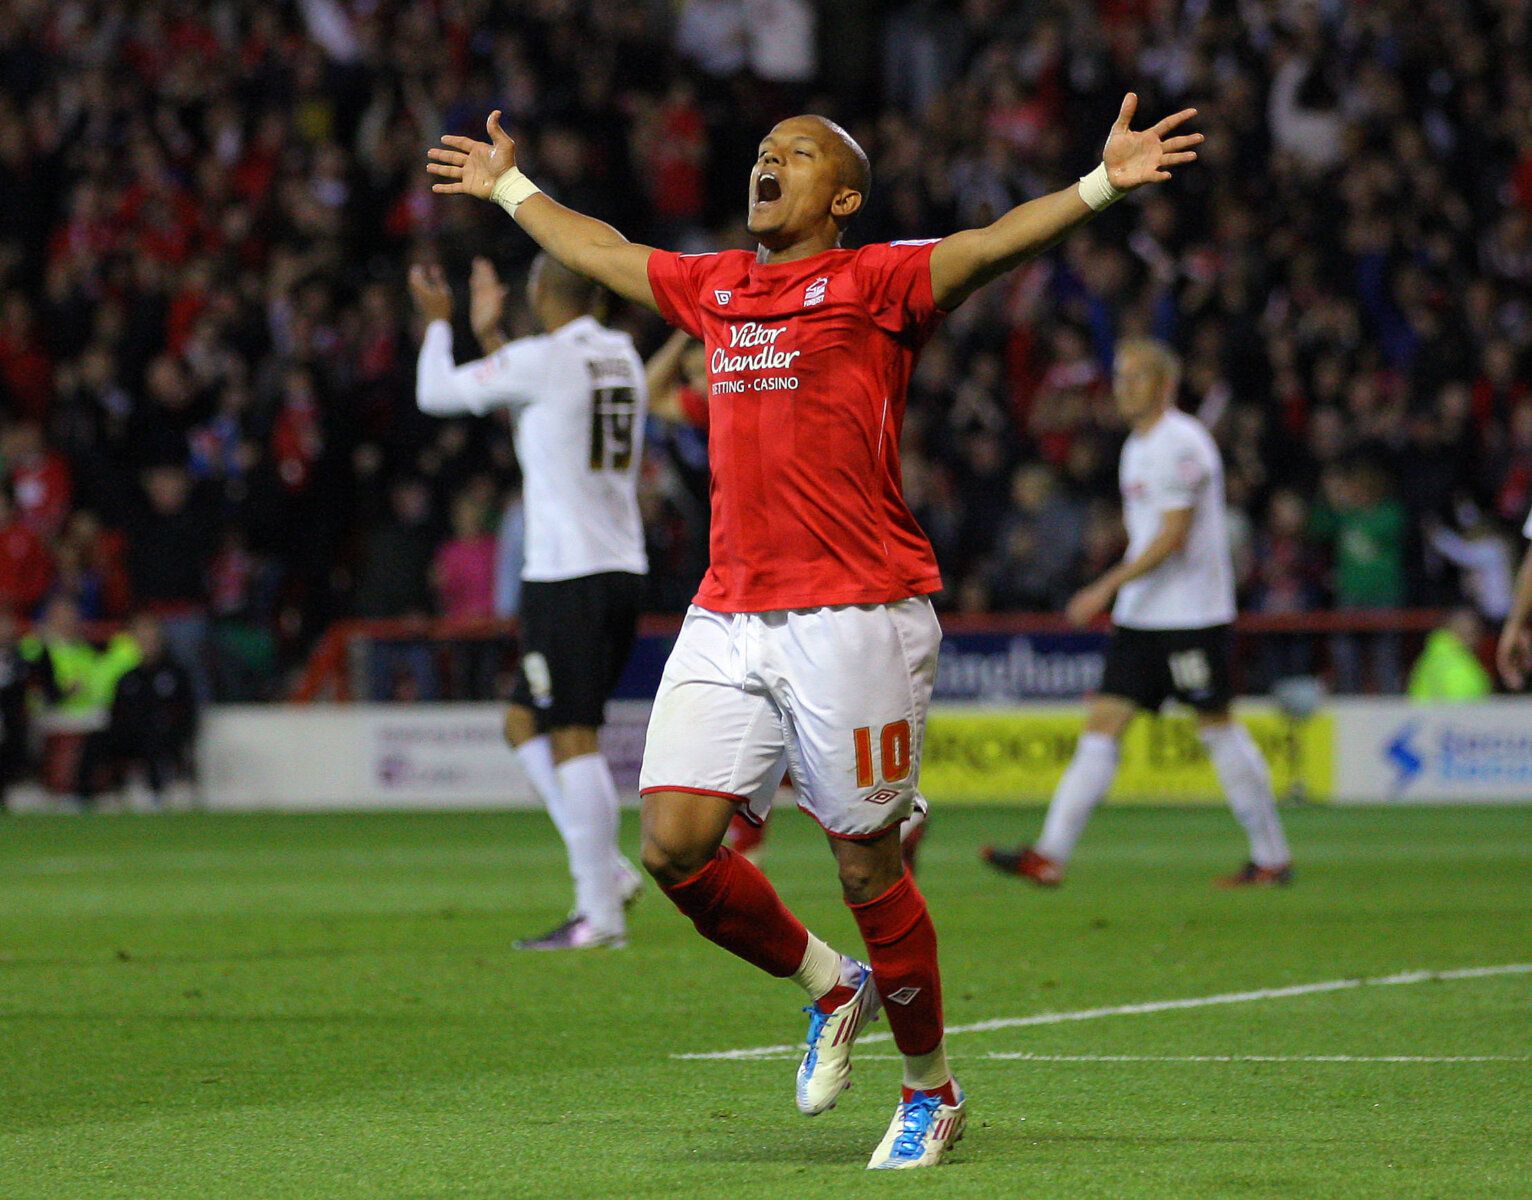 Football - Nottingham Forest v Swansea City npower Football League Championship Play-Off Semi Final First Leg - The City Ground - 10/11 - 12/5/11 
Nottingham Forest's Robert Earnshaw celebrates scoring before it disallowed for offside 
Mandatory Credit: Action Images / Andrew Couldridge 
Livepic